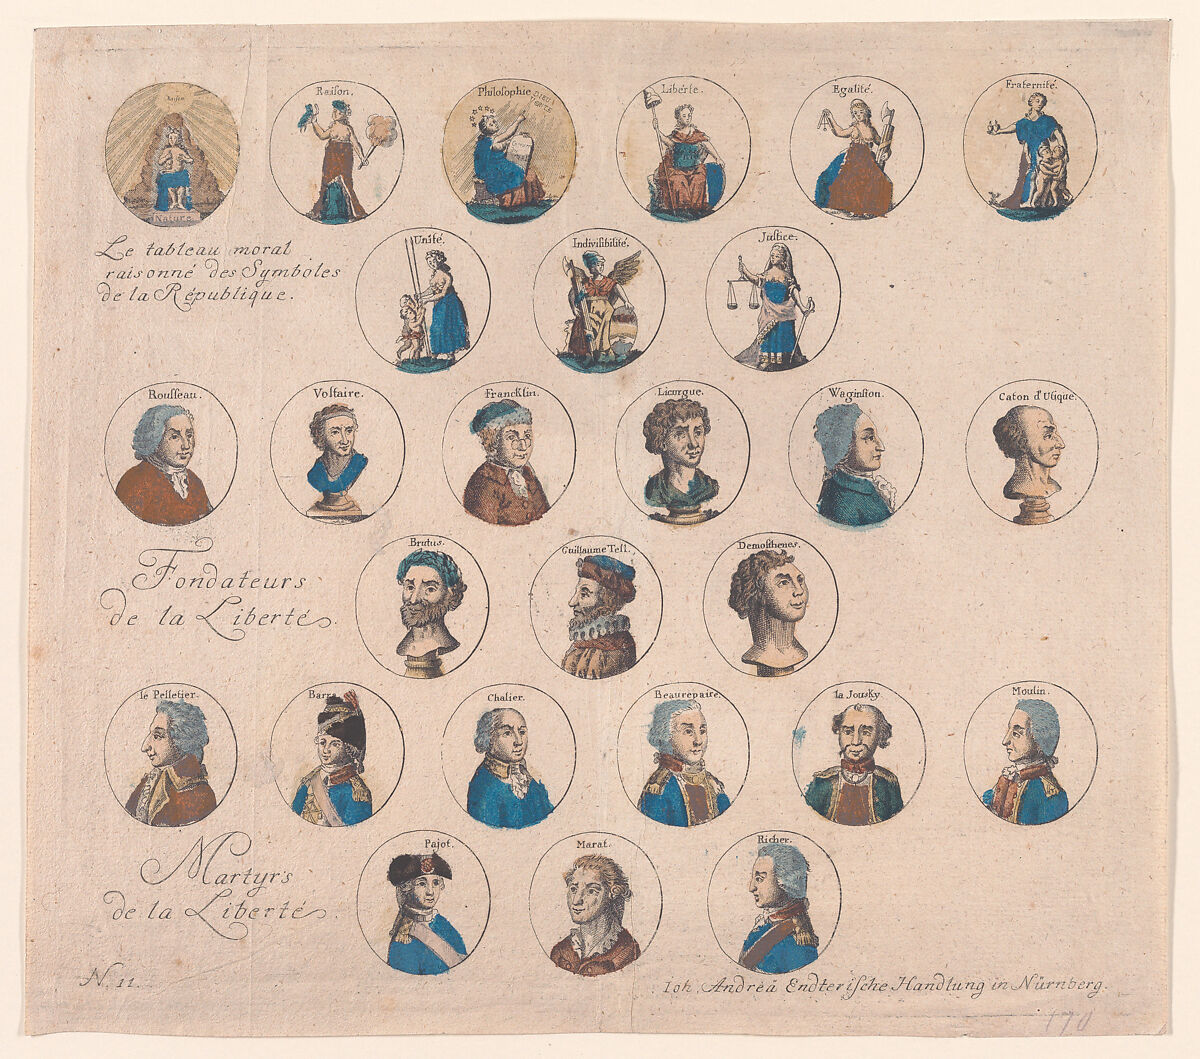 The Reasoned Moral Chart of Symbols of the Republic, Founders of Liberty, and Martyrs of Liberty, Johann Andreas Endterische Handlung, Hand-colored etching